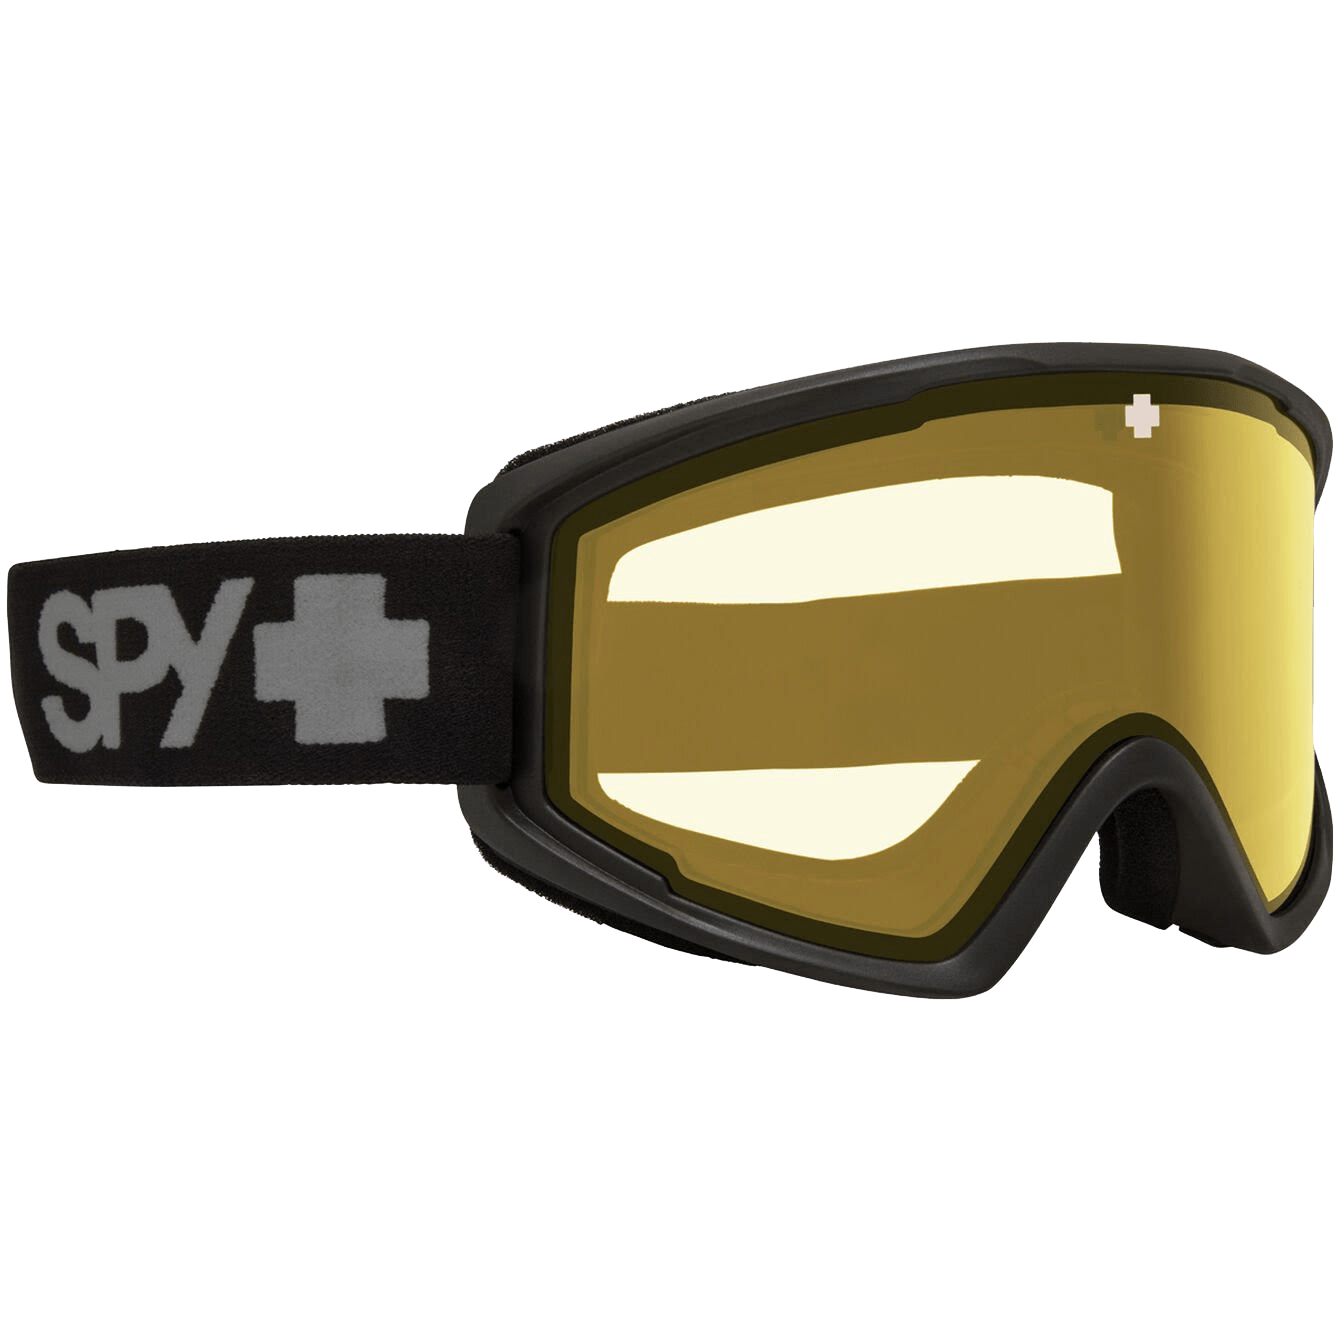 SPY Crusher Elite Black Snow Goggles with Photochromic Lens 8Lines Shop - Fast Shipping